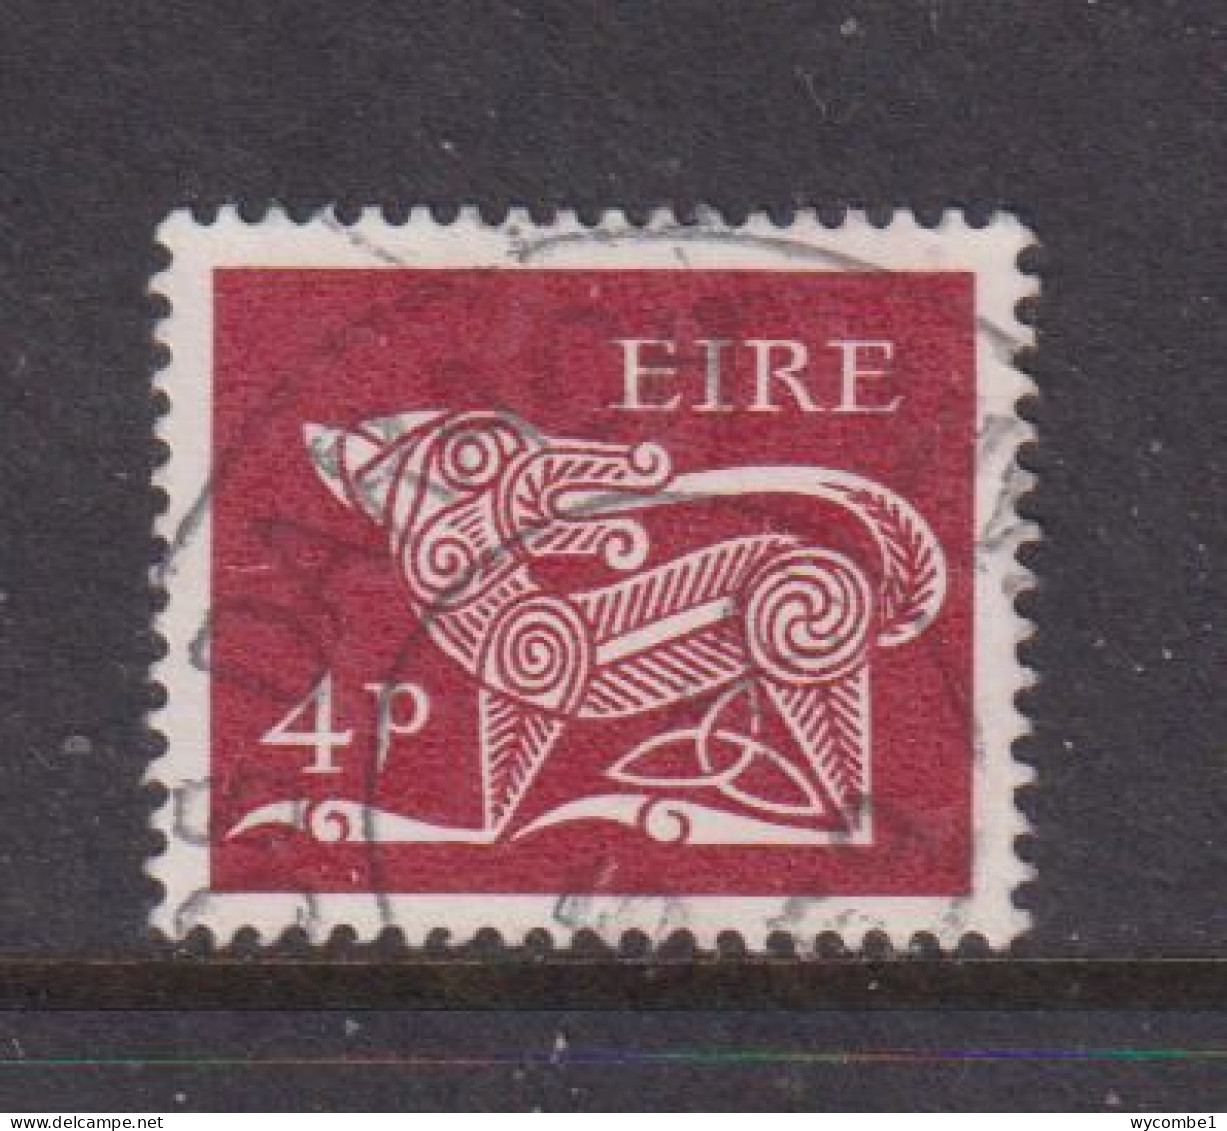 IRELAND - 1968  Definitives  4d  Used As Scan - Usados